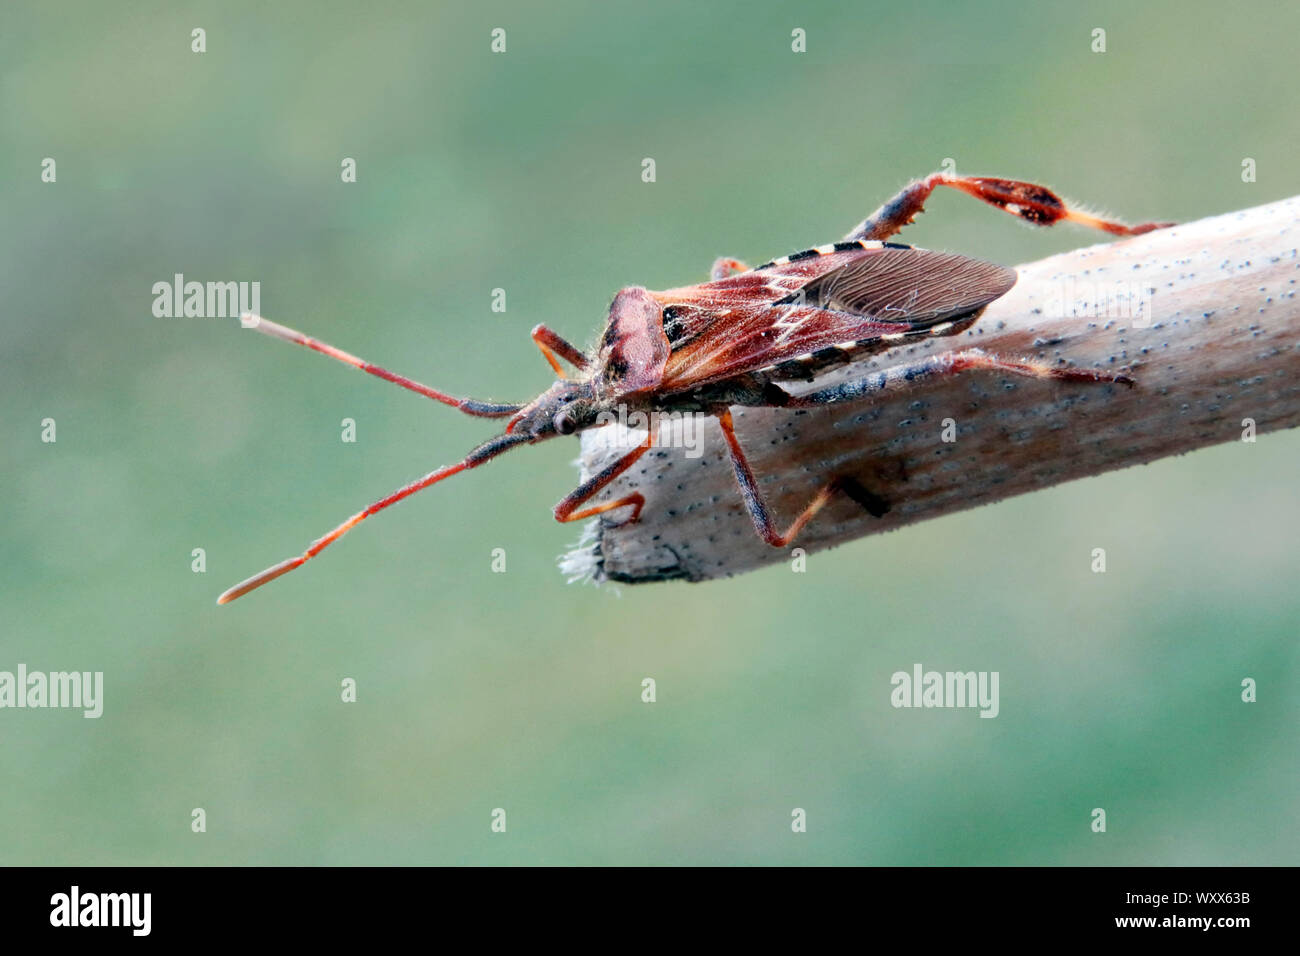 Western conifer seed bug (Leptoglossus occidentalis) Stock Photo